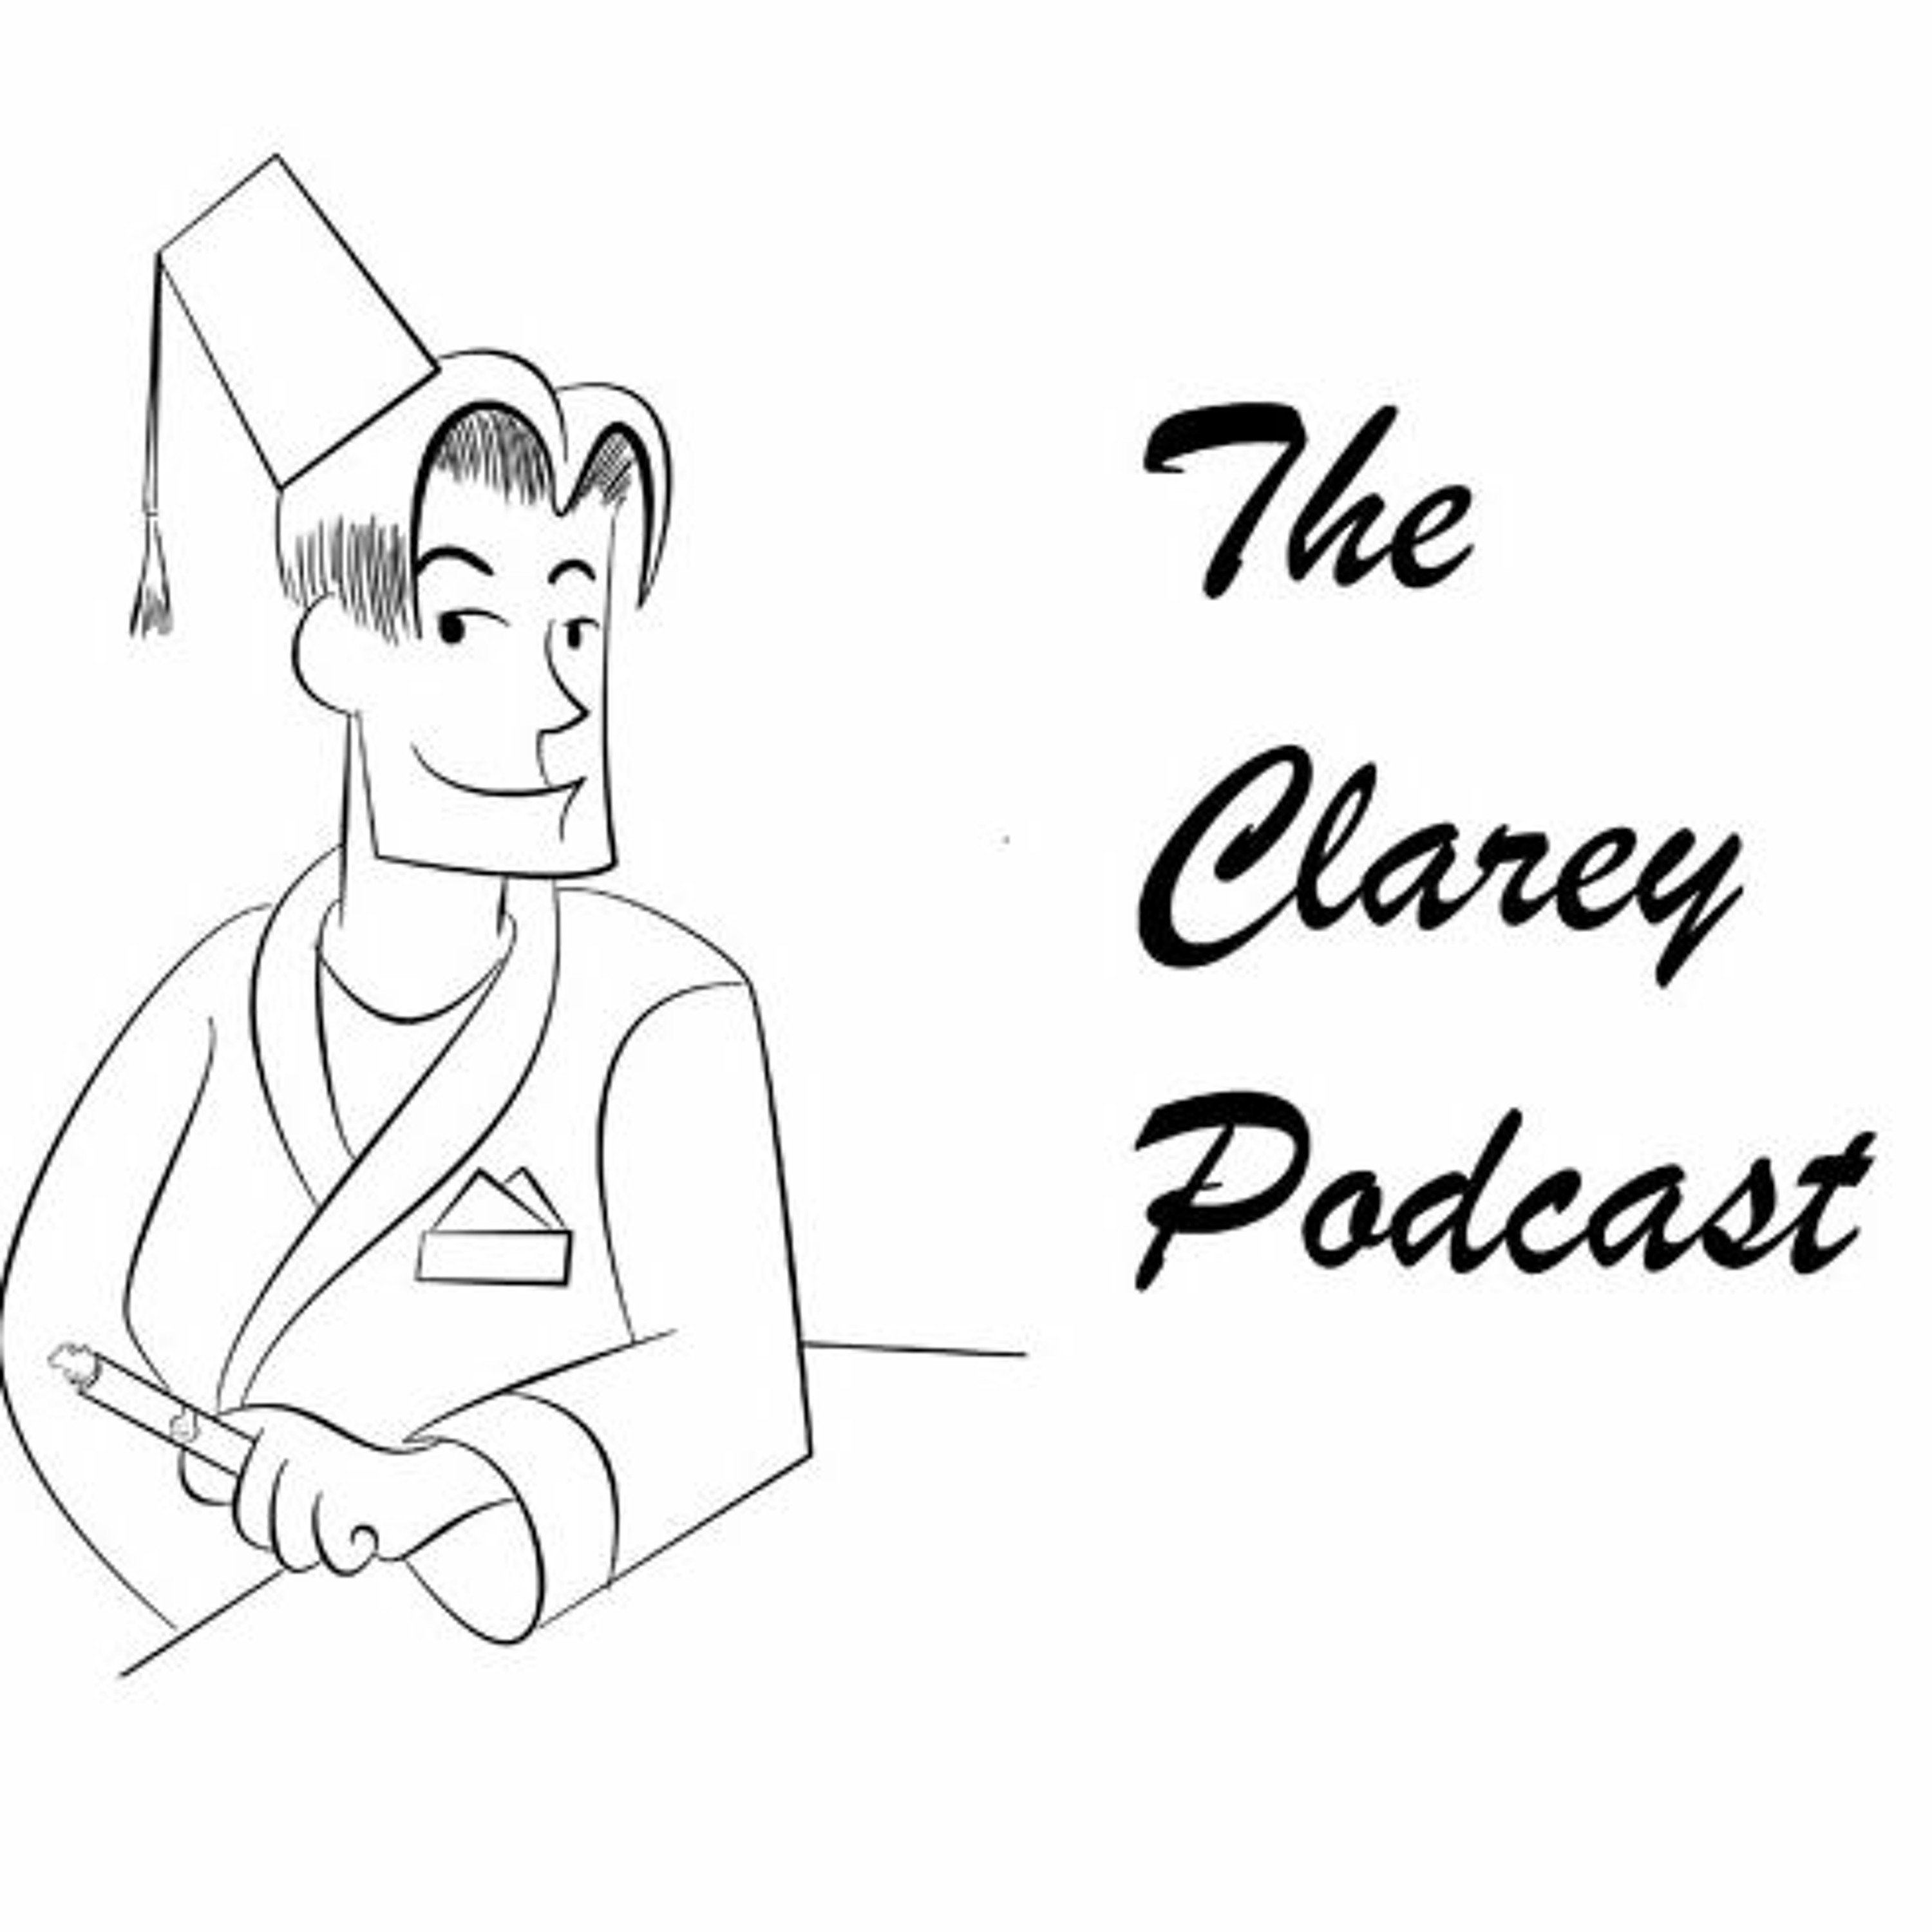 The Clarey Podcast - The ”Zoomers Aren’t OK” Episode